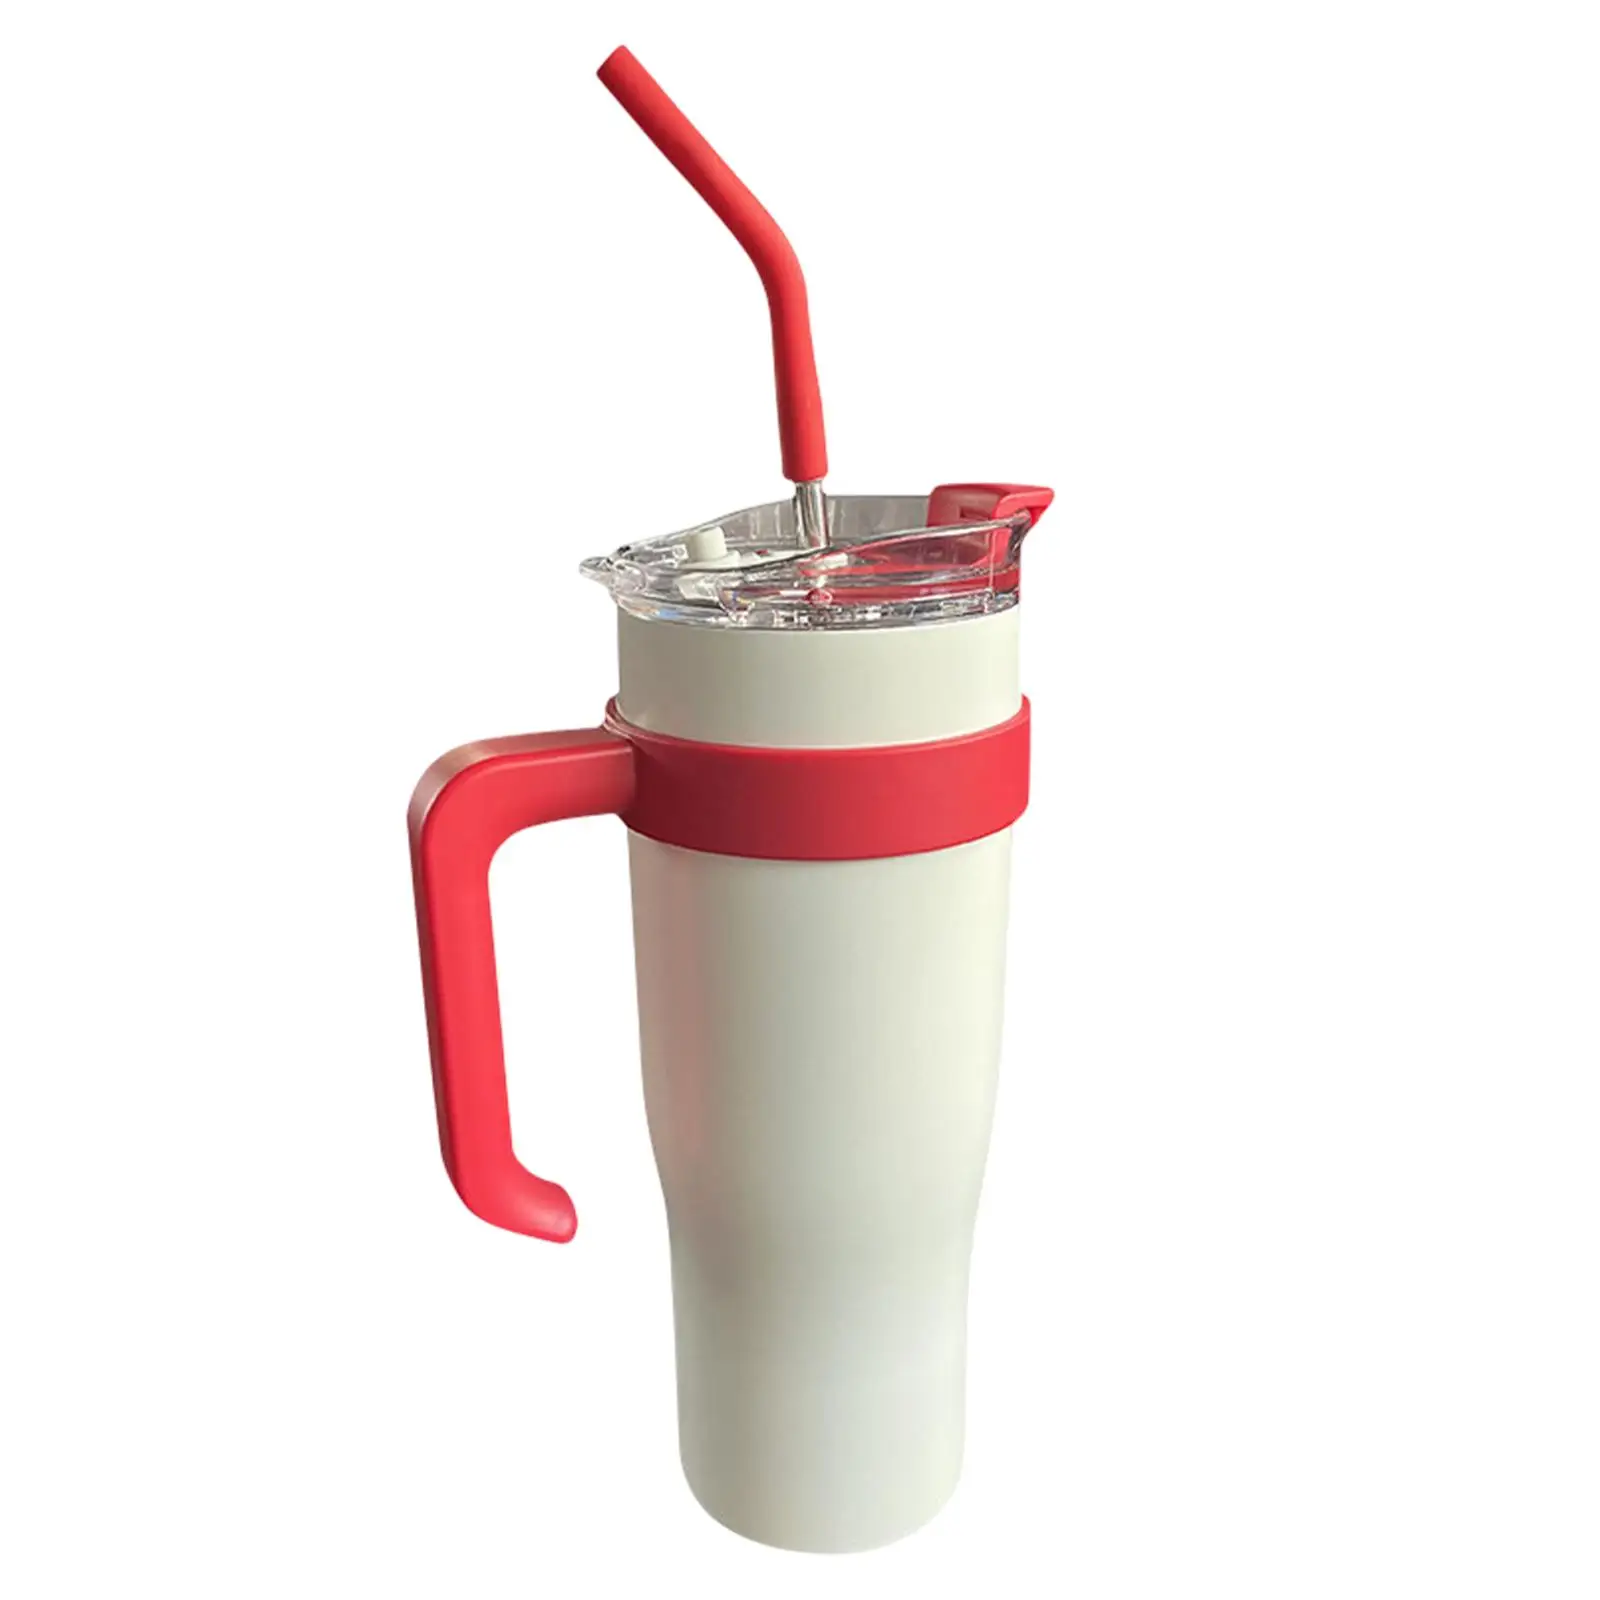 Insulated Sippy Cup with Straw and Lid Durable Thermal Cup Insulated Cup Water Bottle Cup for Car Travel Cold Hot Drinks